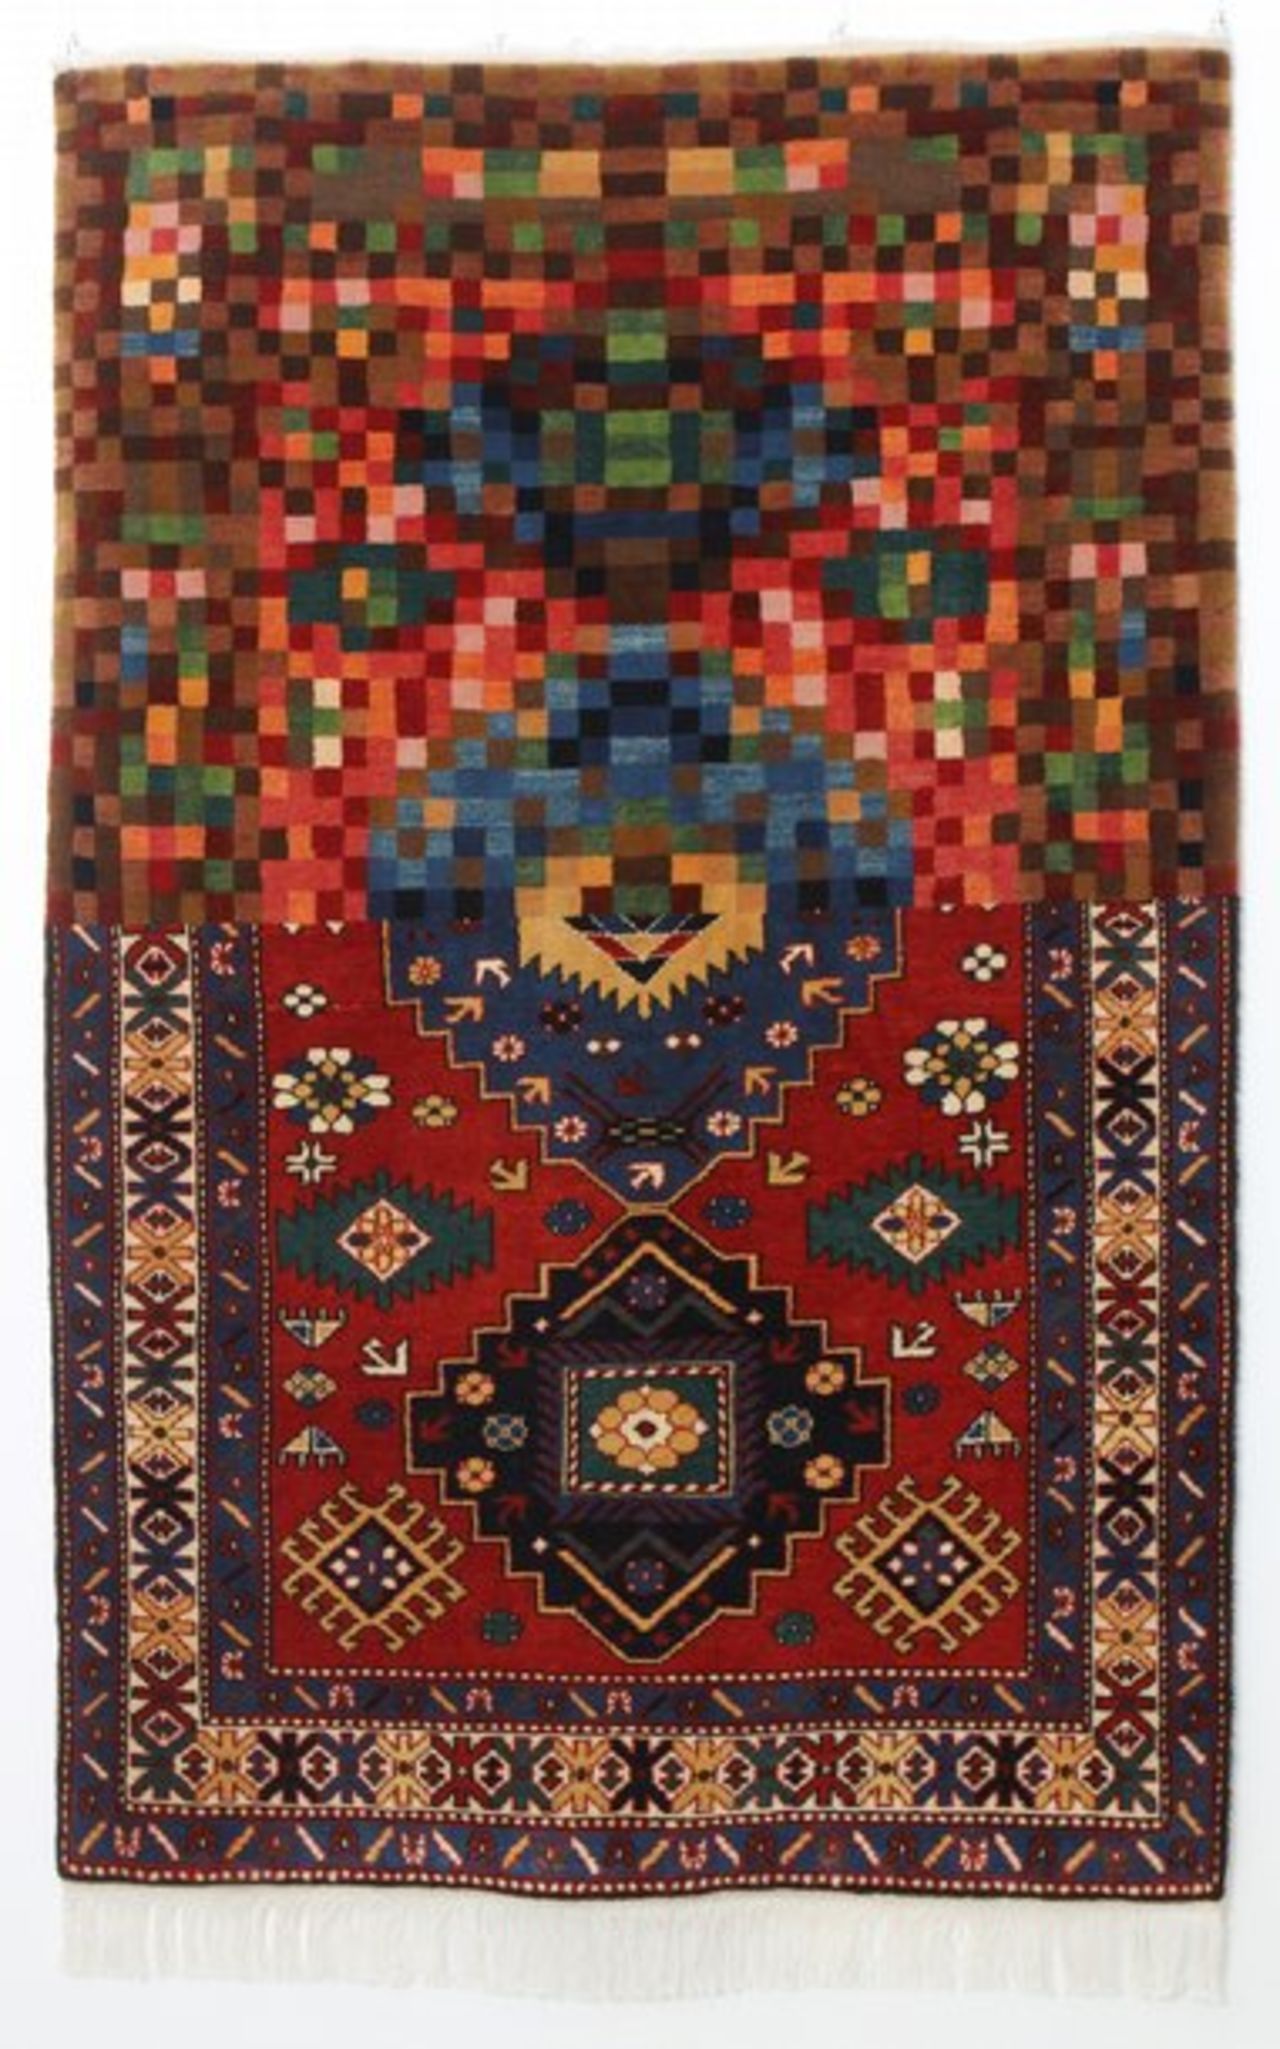 Faig Ahmed's woolen handmade carpets are based on Azerbaijan's ancient weaving traditions. They are constructed by hand and, for the most part, follow a conventional design. In each case, however, Ahmed reconfigures part of the pattern. <br /><br />With this carpet, titled Pixelate Tradition, much of the pattern has disintegrated into pixels. By disrupting traditional forms, Ahmed aims to show how, "Ideas that have been formed for ages are being changed in moments".